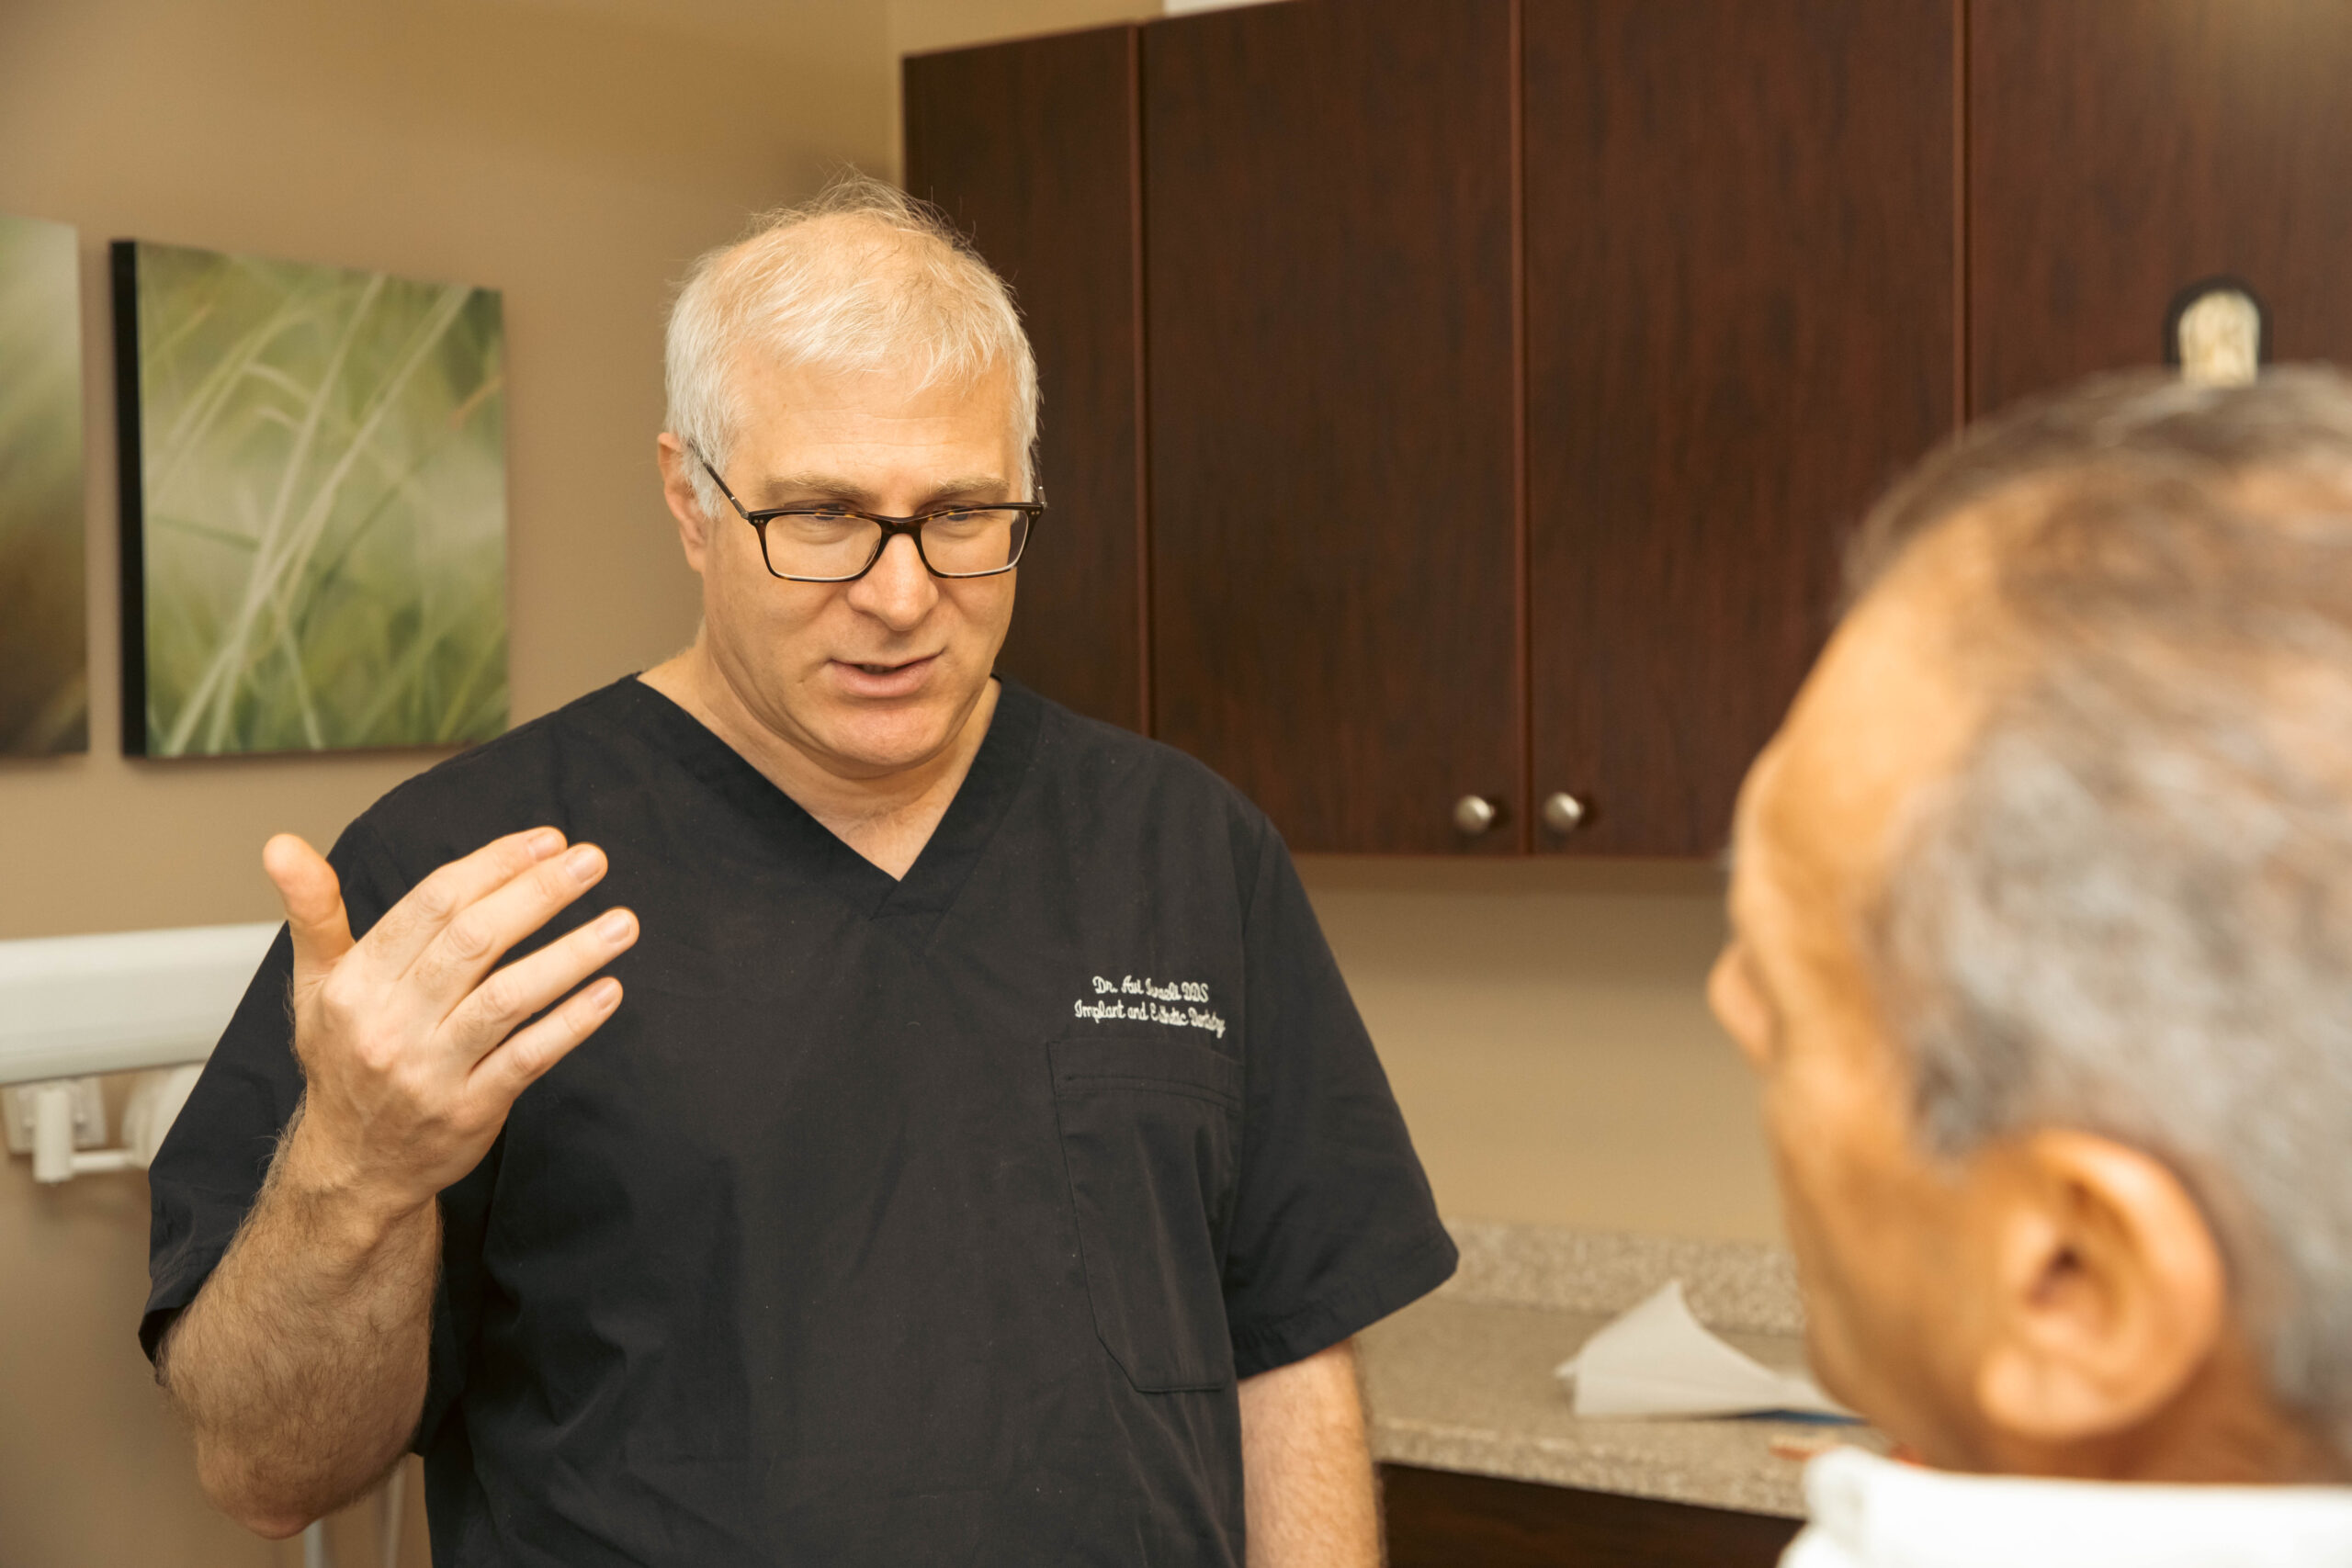 Dr. Isreali talking to a patient, while gesturing with his hands, about his zirconia fixed bridge procedure.